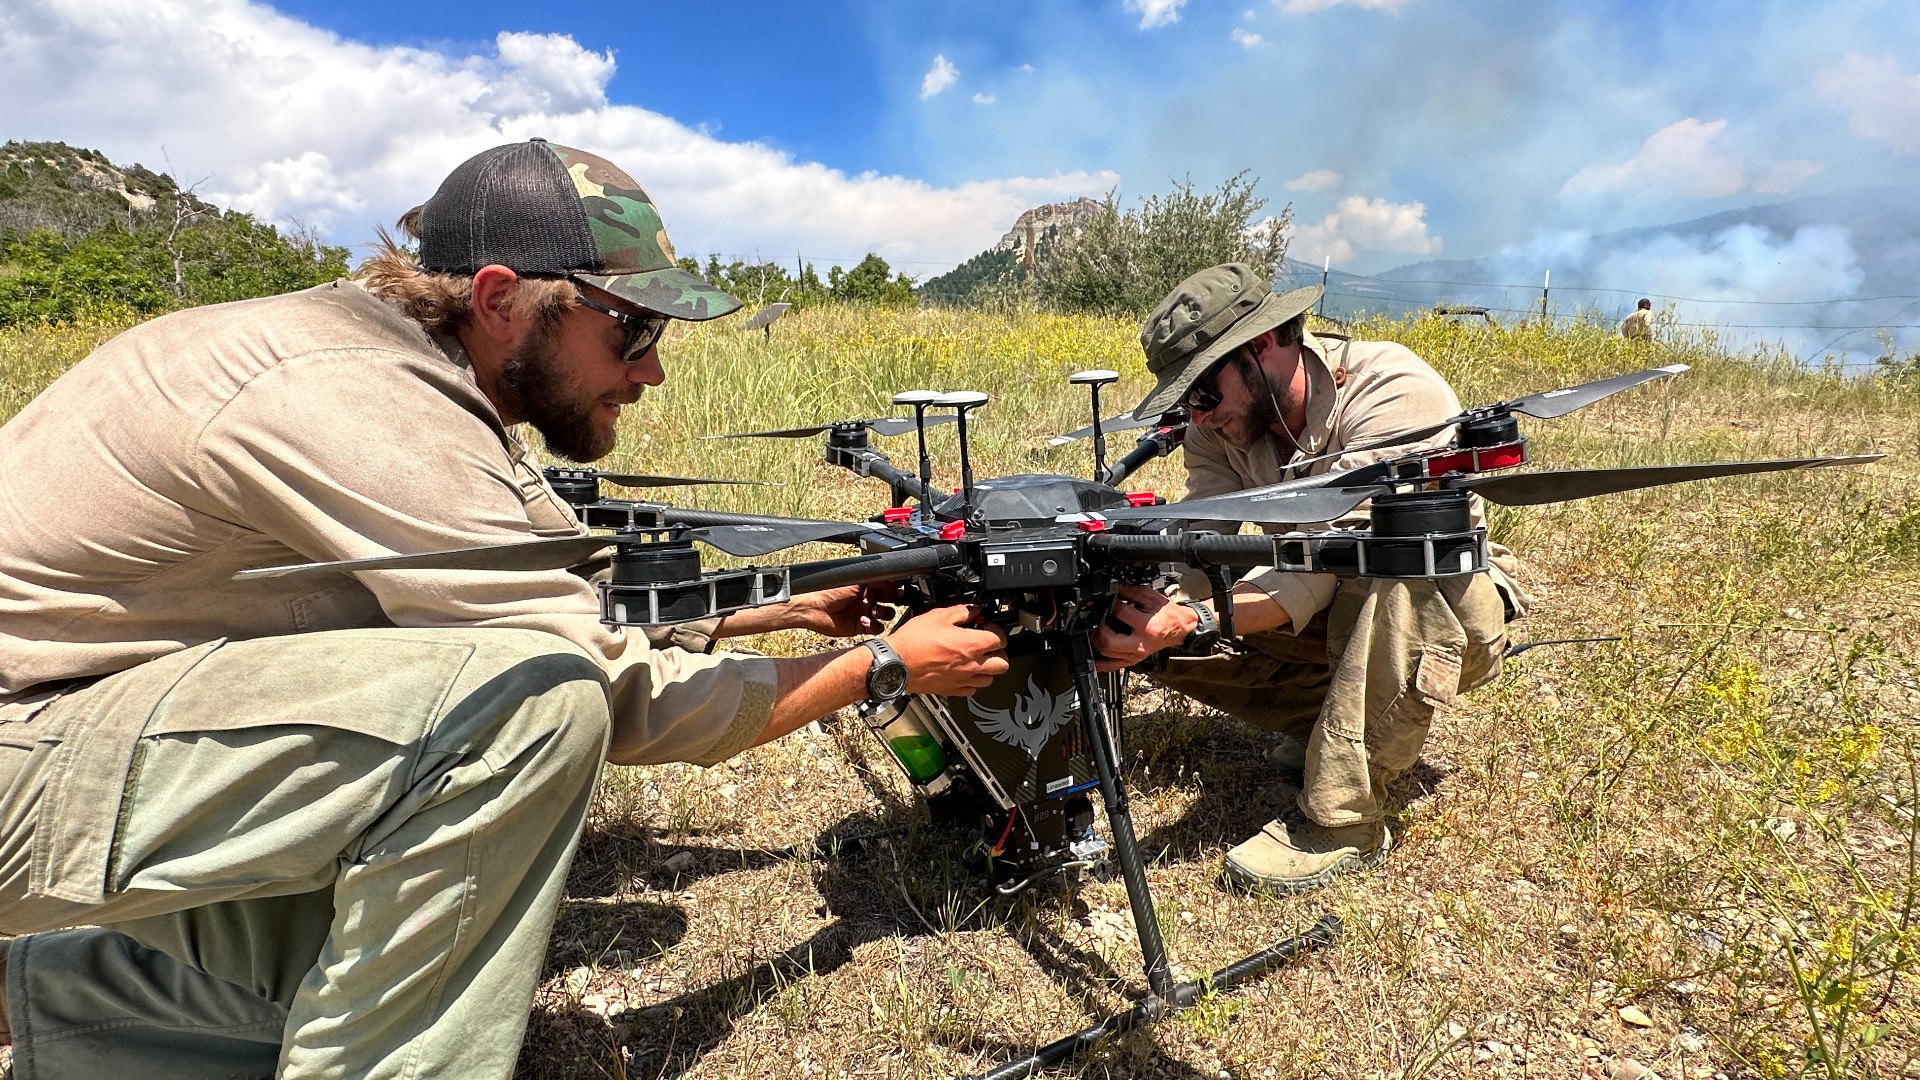 Unlike helicopters, drones can safely fly through smoke, at night and at low elevations to guide fire crews and even drop charges to ignite containment burns.